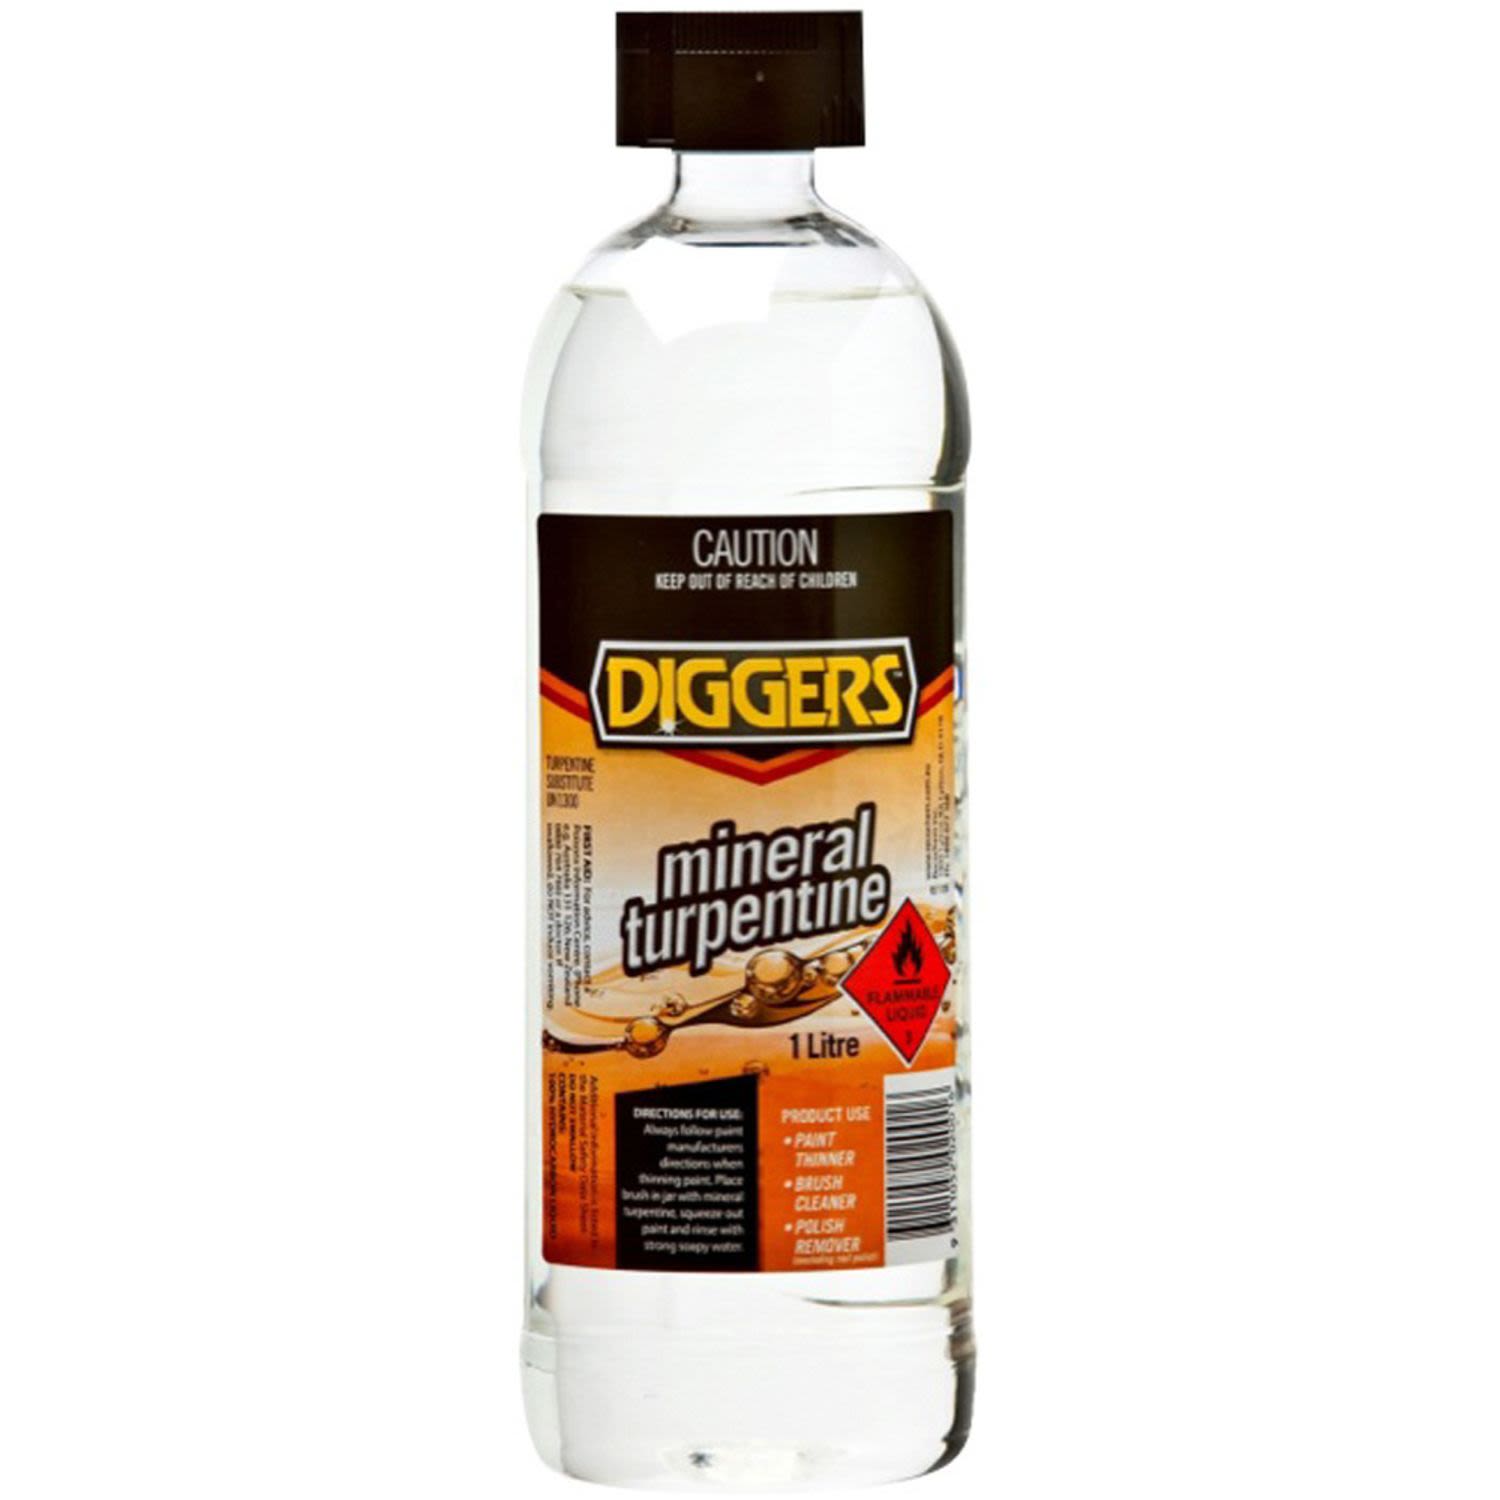 Diggers Turpentine, 1 Litre